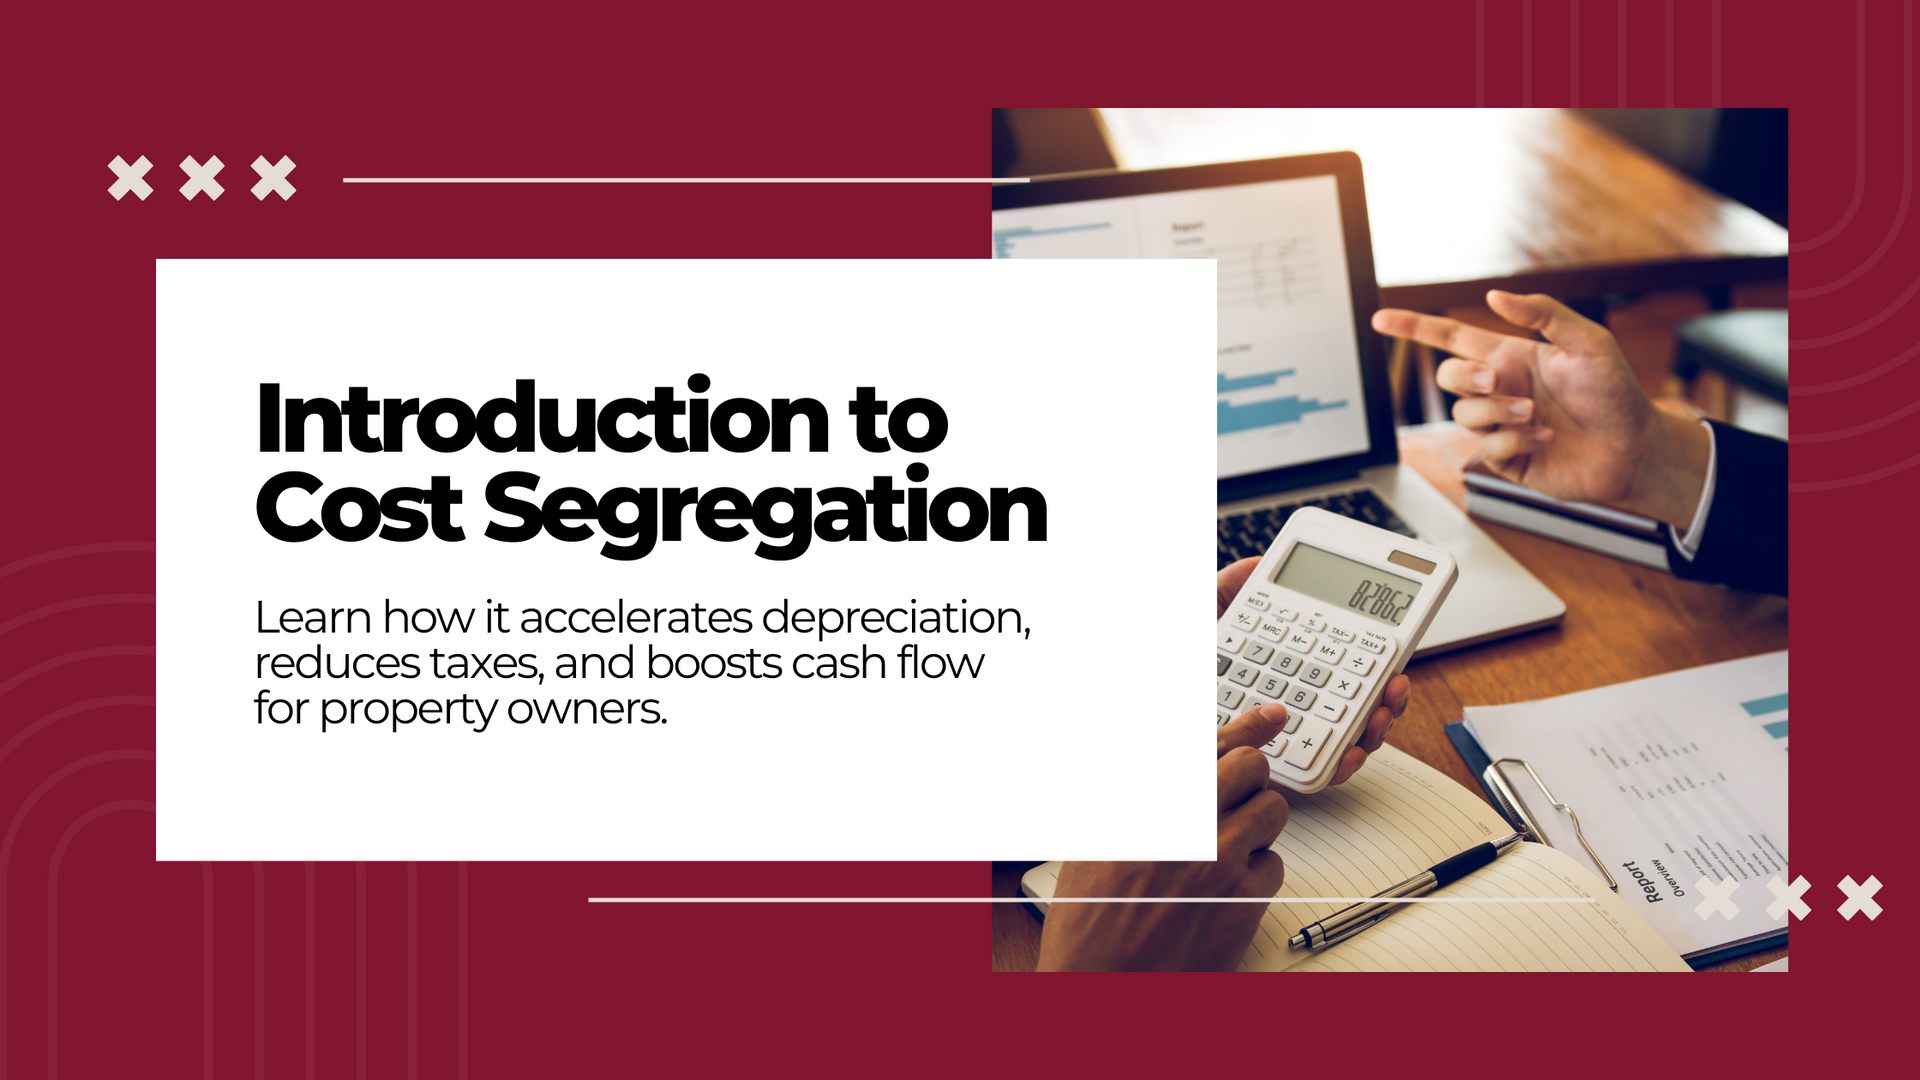 What is Cost Segregation?